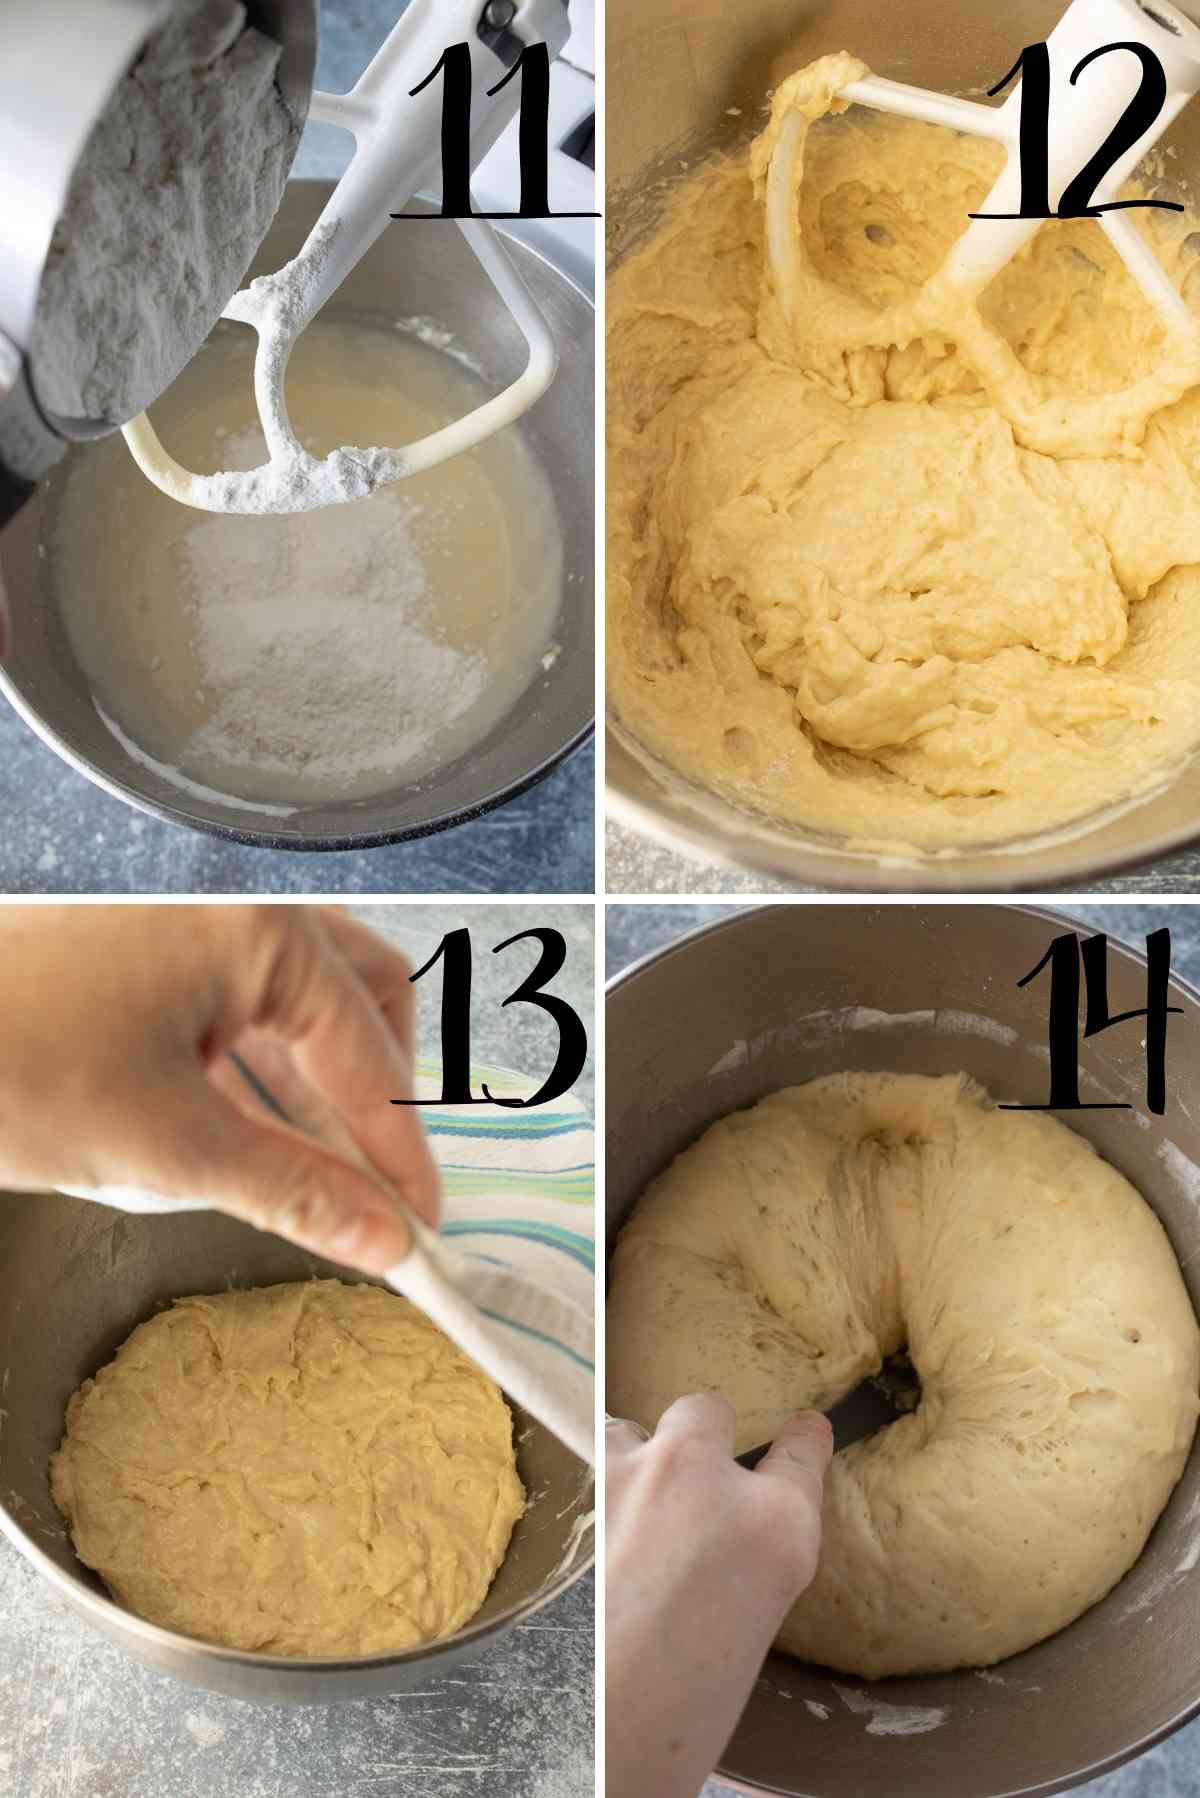 Remaining flour beaten in and batter dough is left to rise.